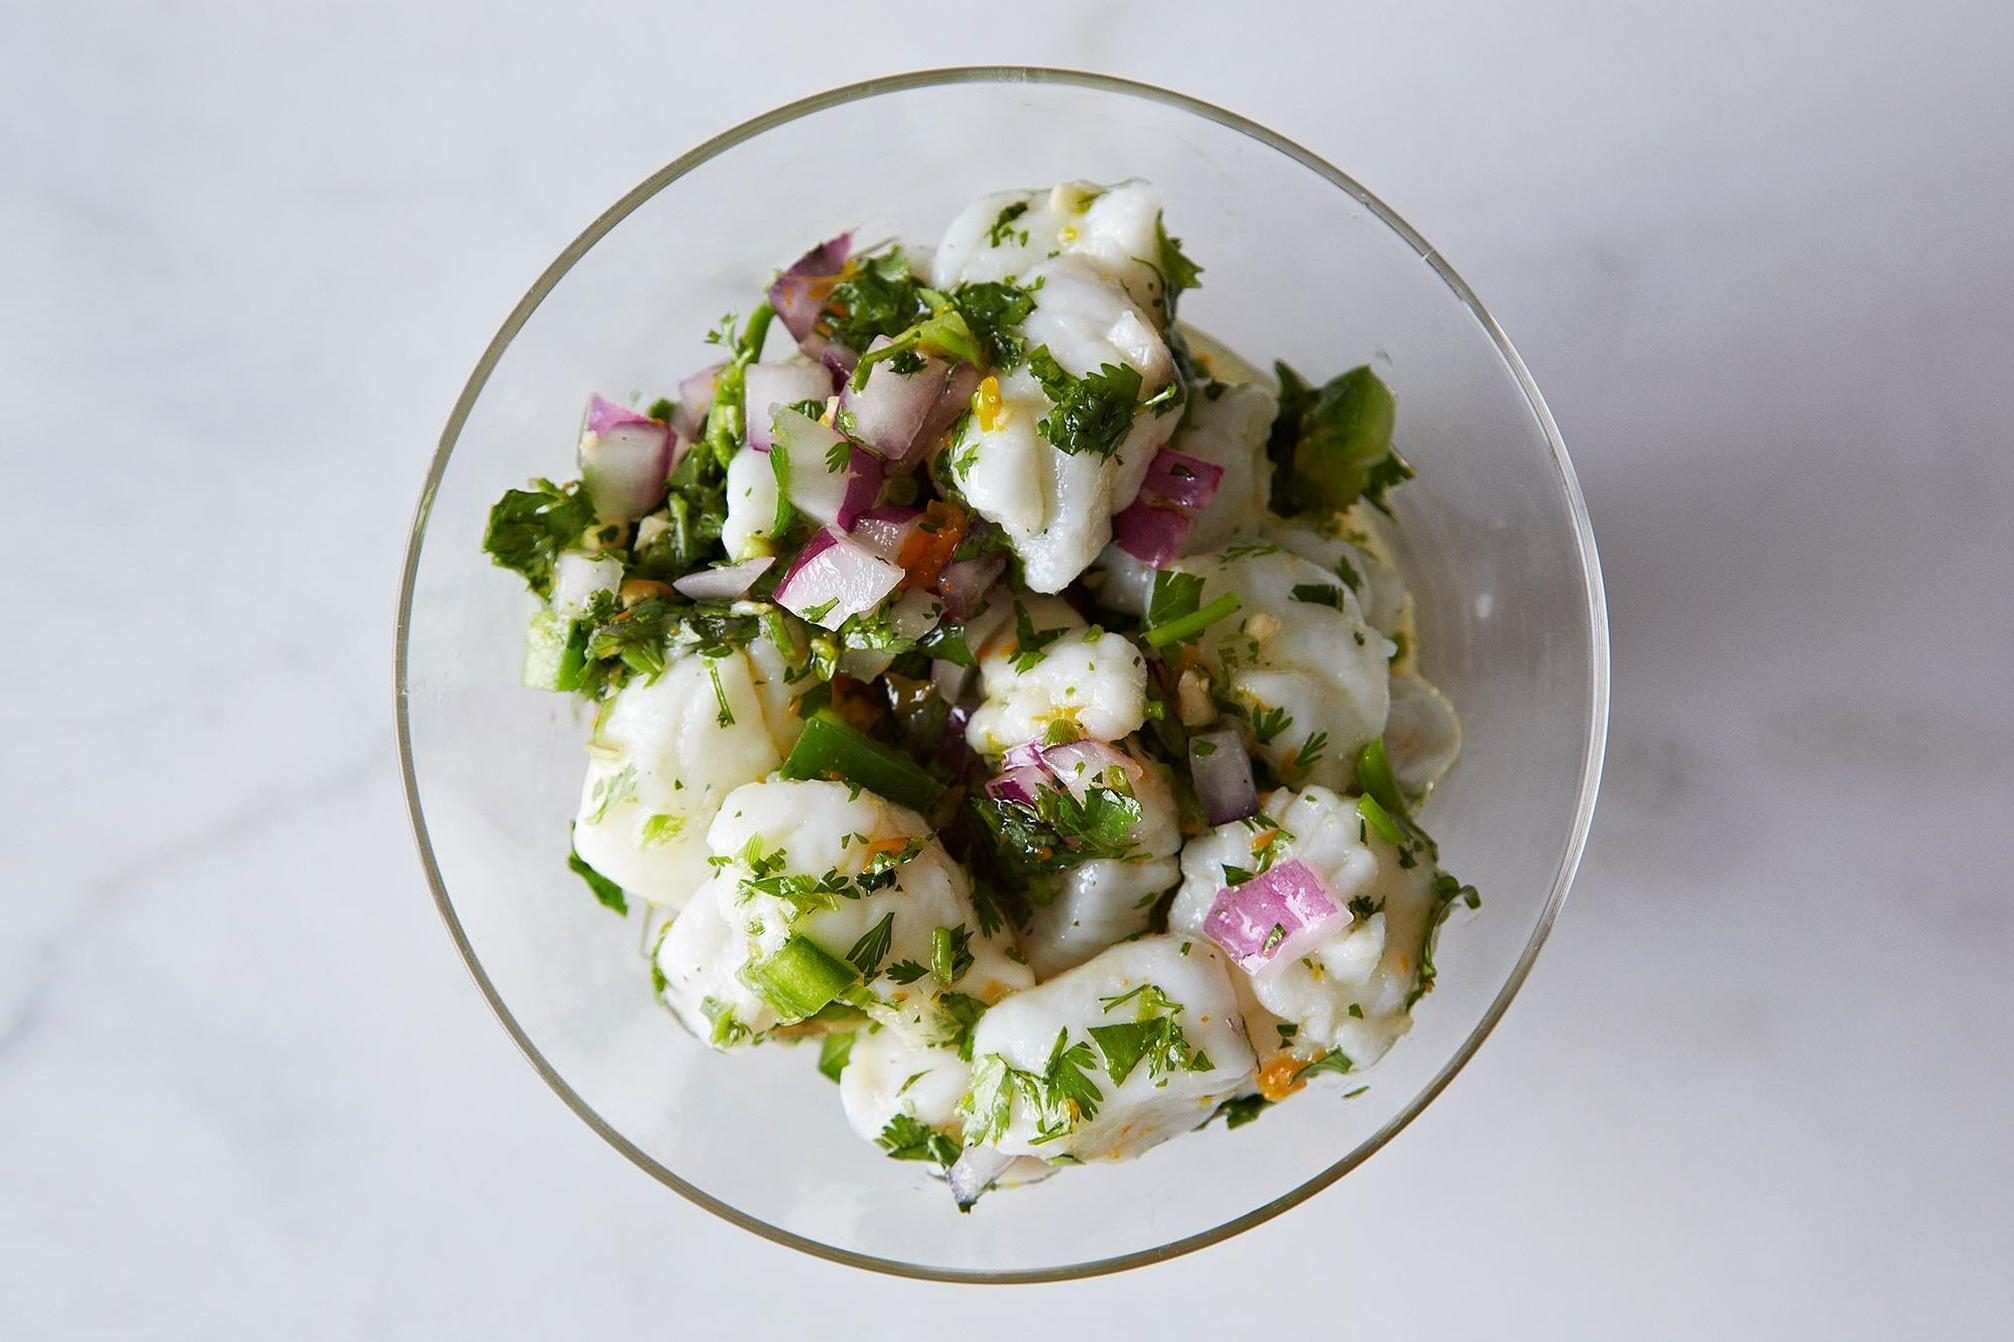  The tangy aroma of pickled onions perfectly complements the zesty ceviche.